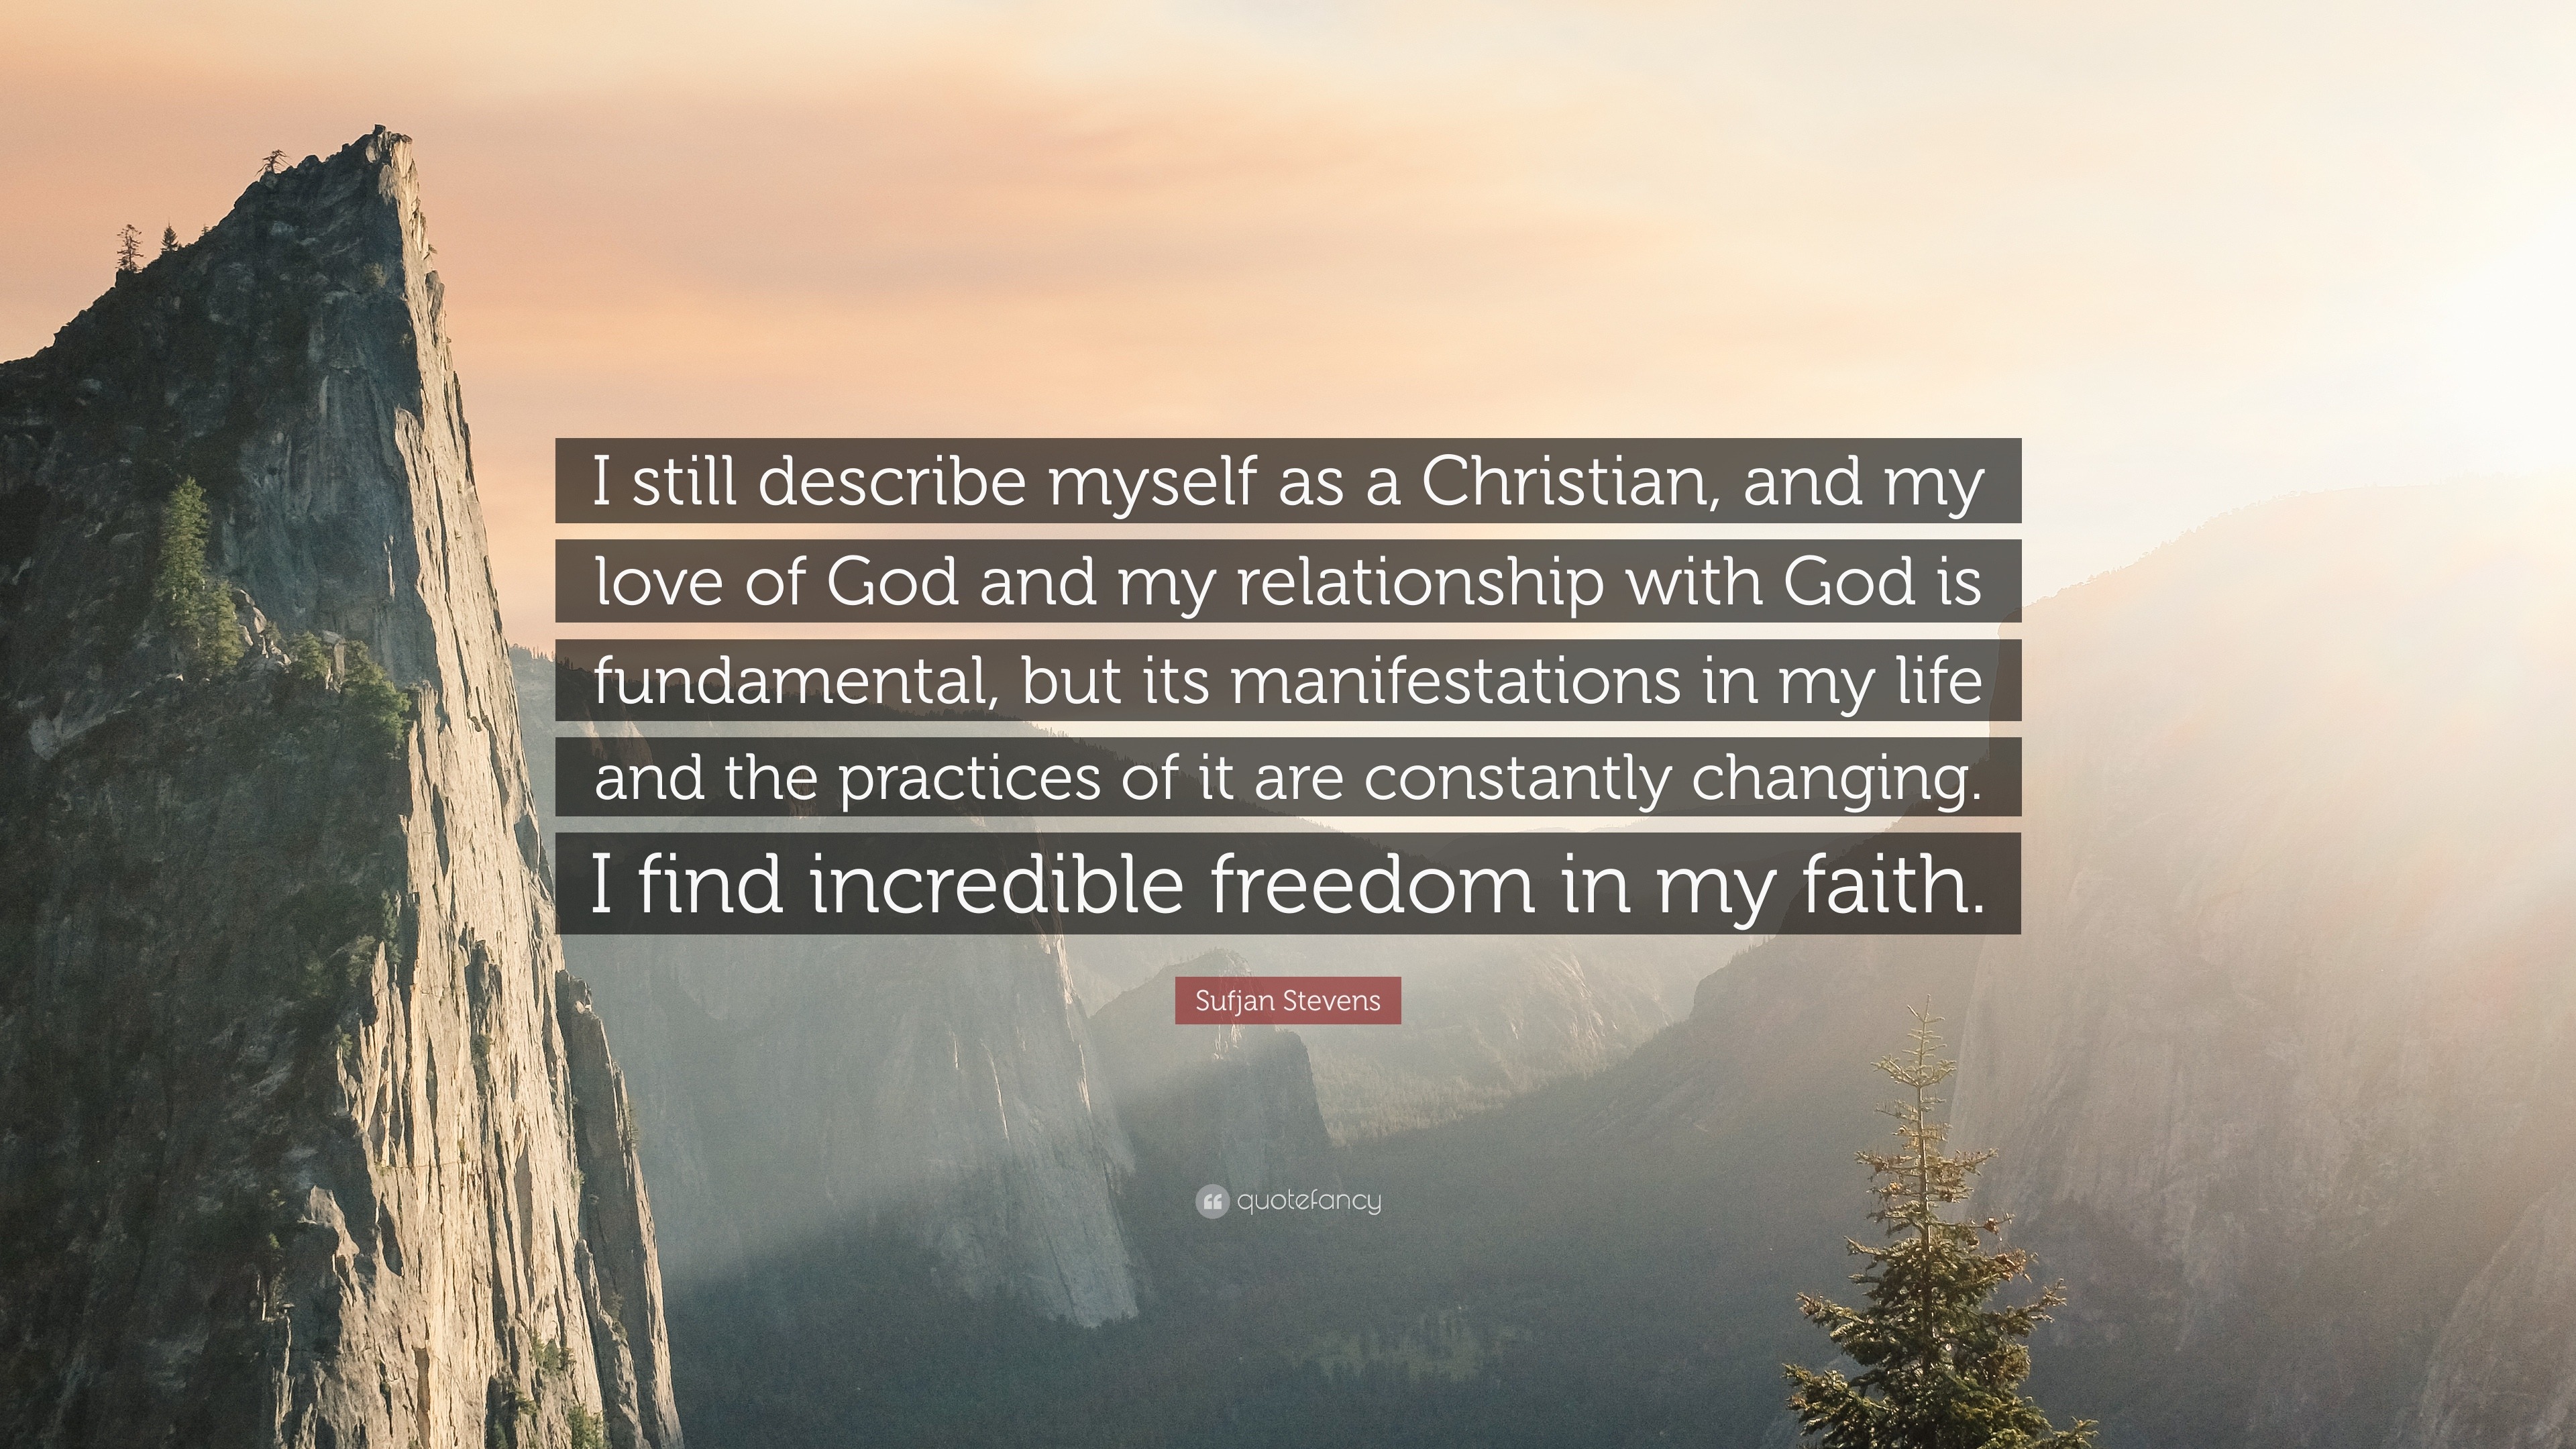 Sufjan Stevens Quote “I still describe myself as a Christian and my love